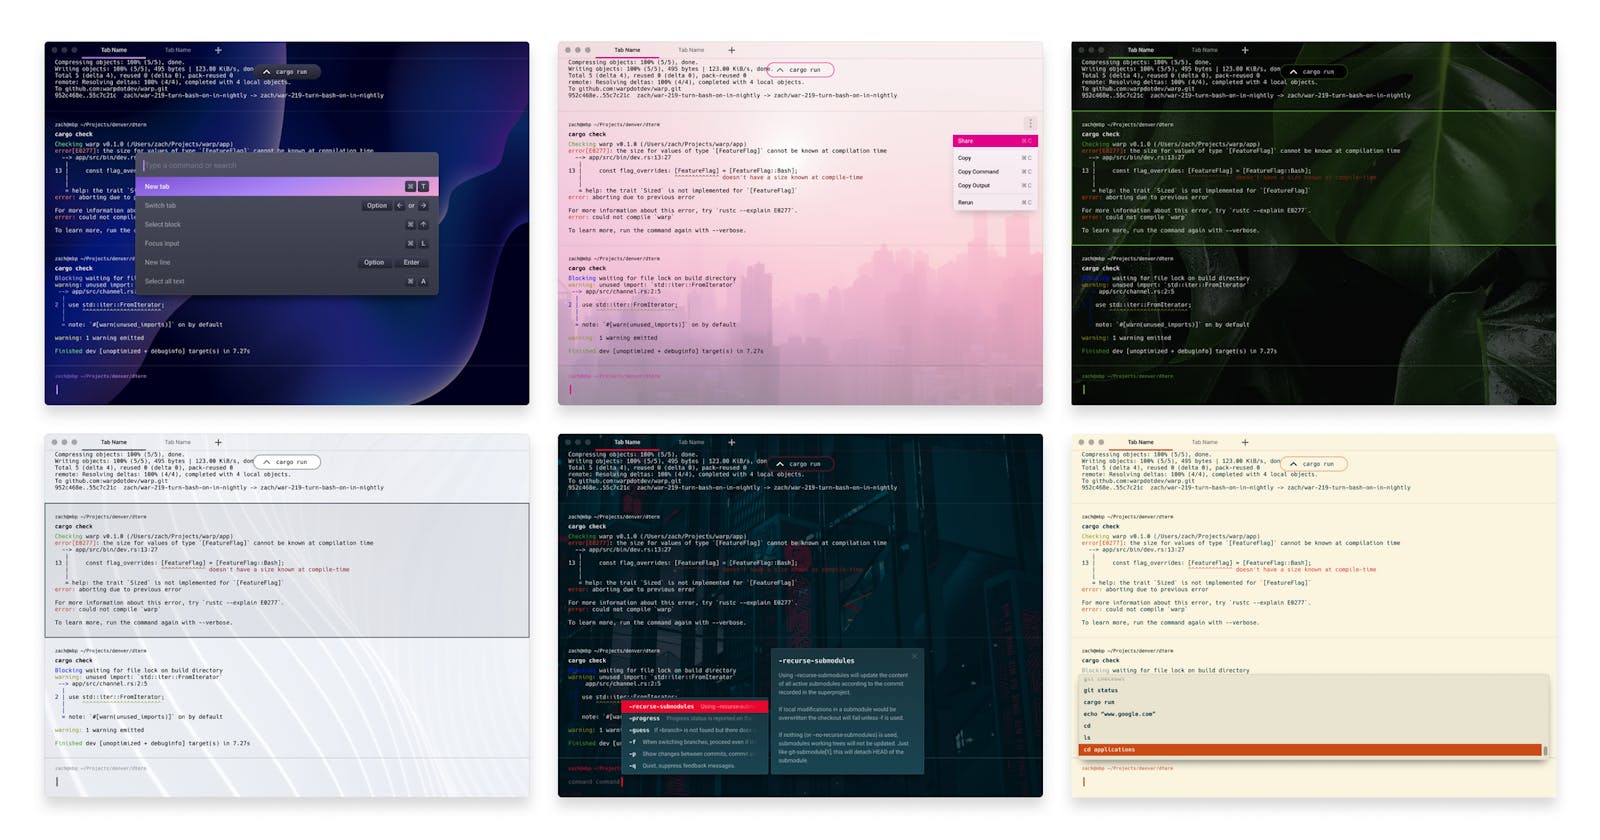 How we designed themes for the terminal - a peek into our process